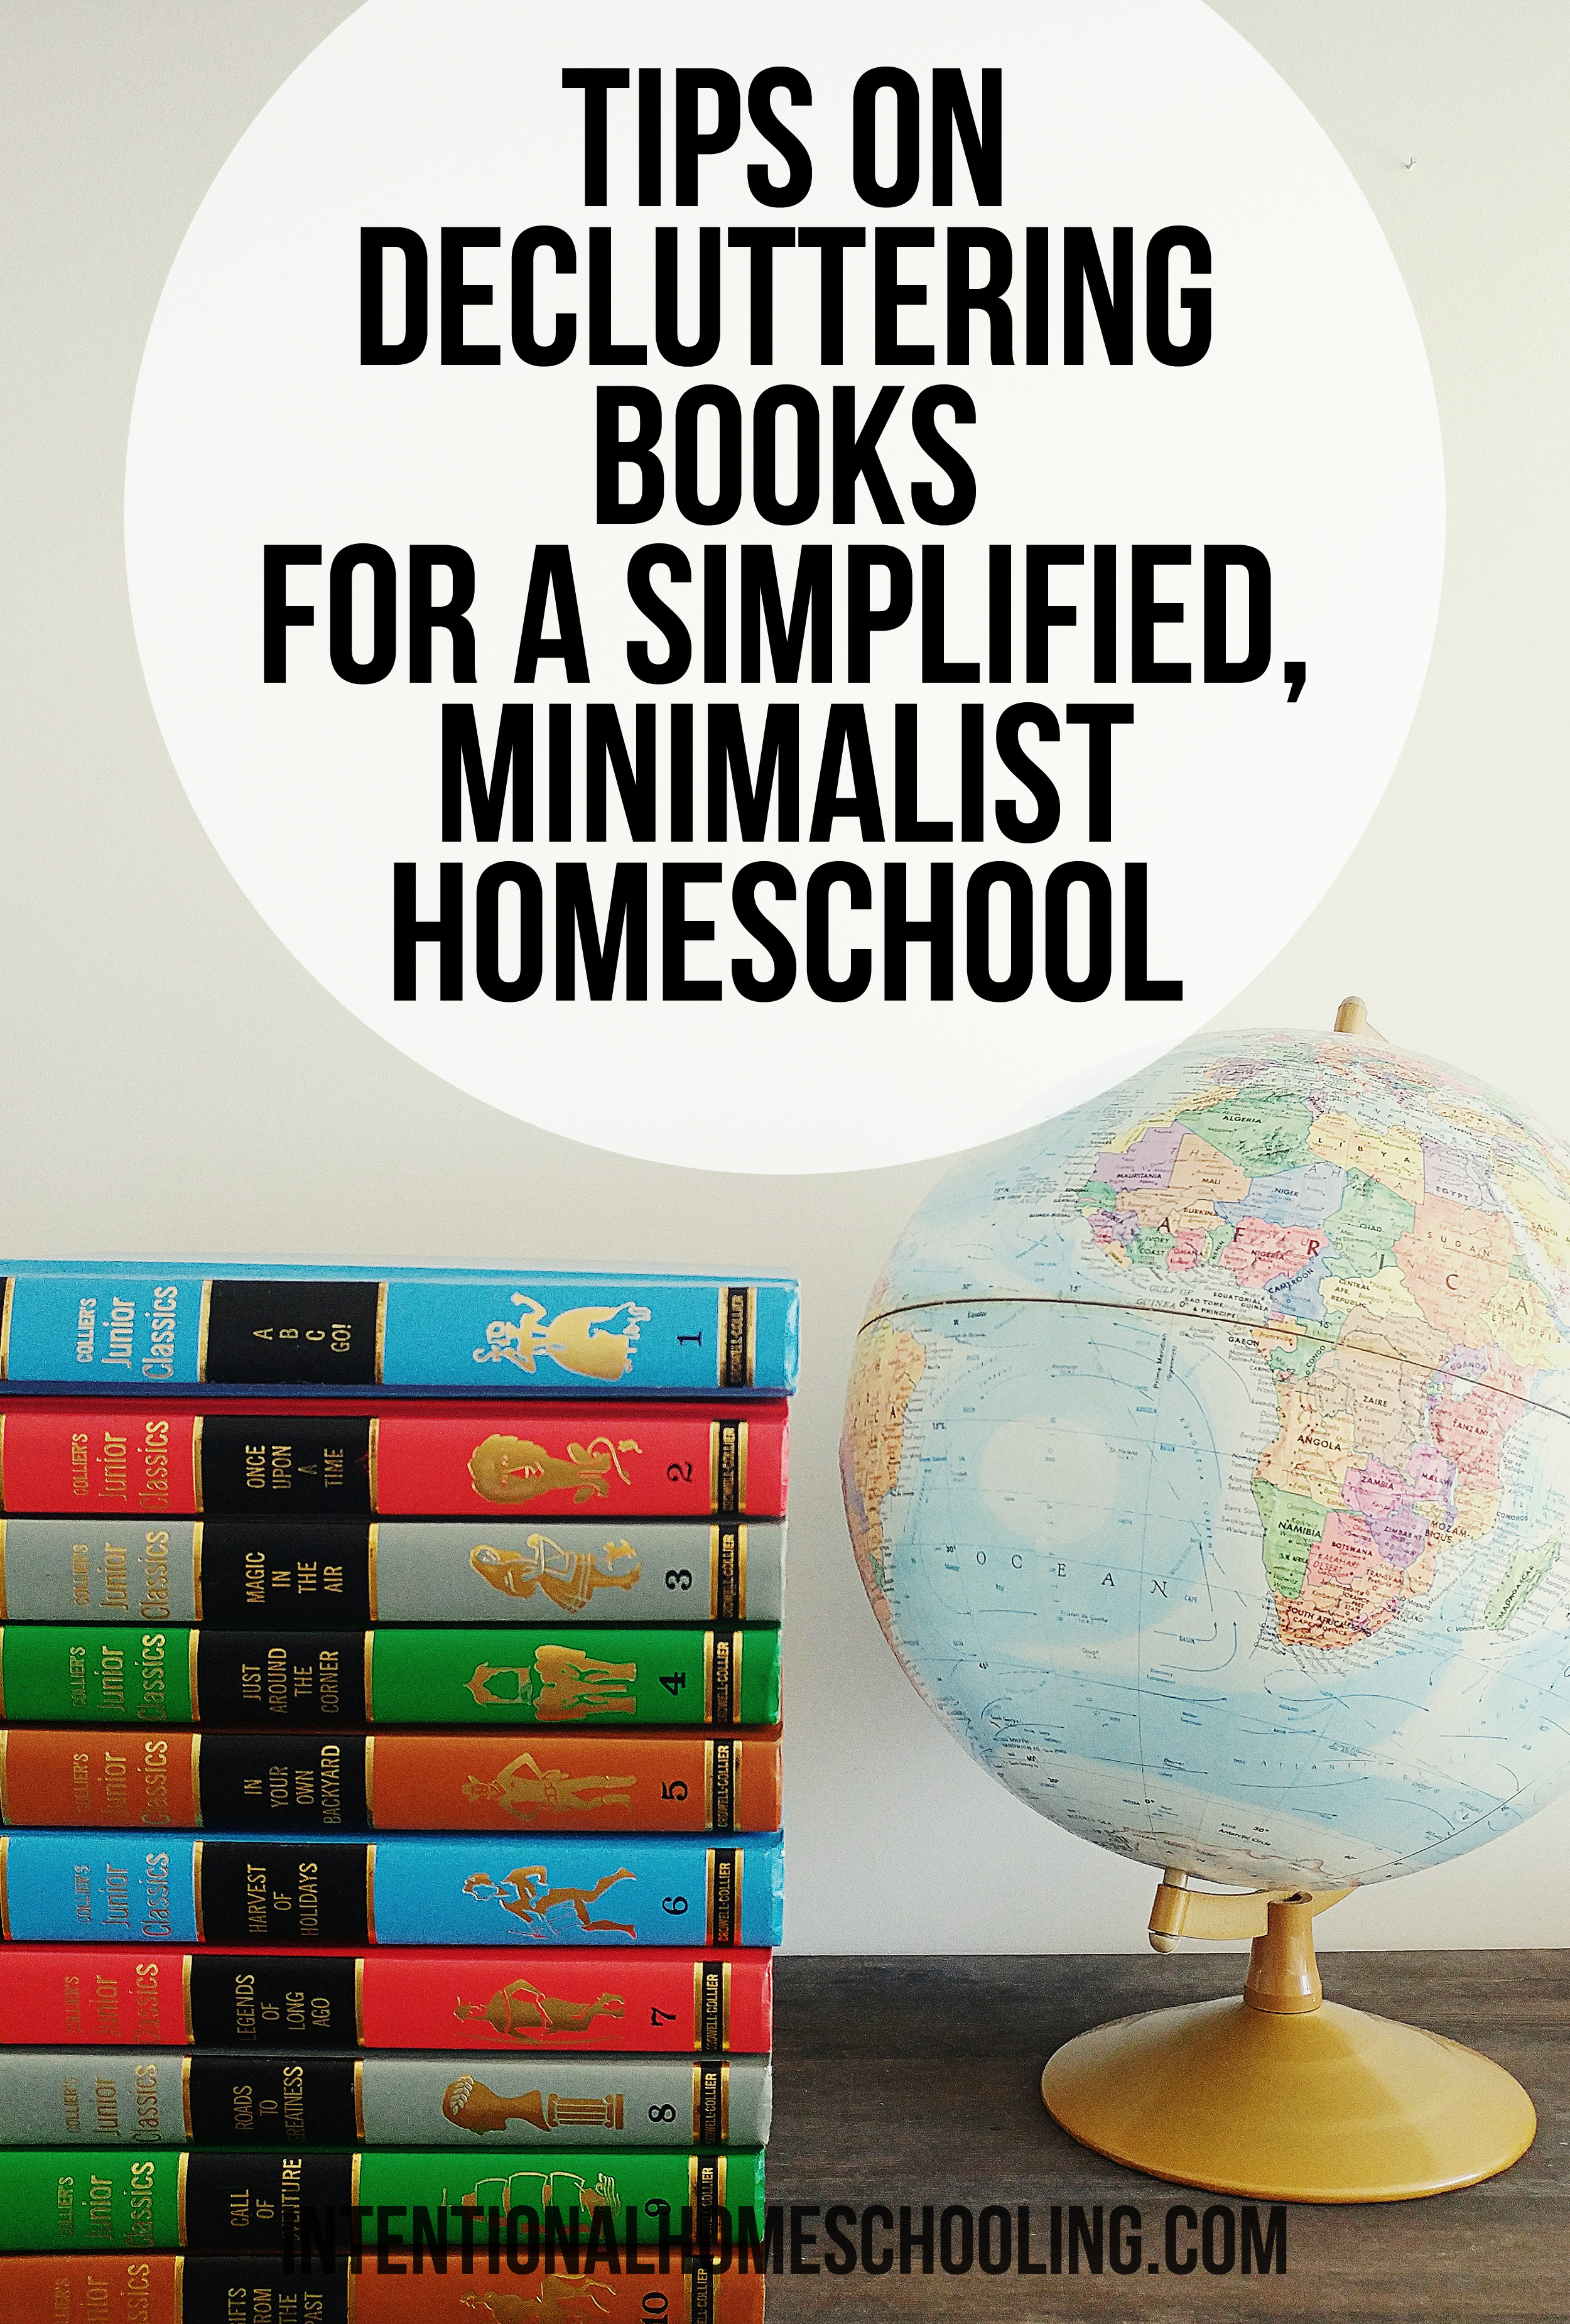 Tip on Decluttering Books for a more Simplified, Minimalist Homeschool